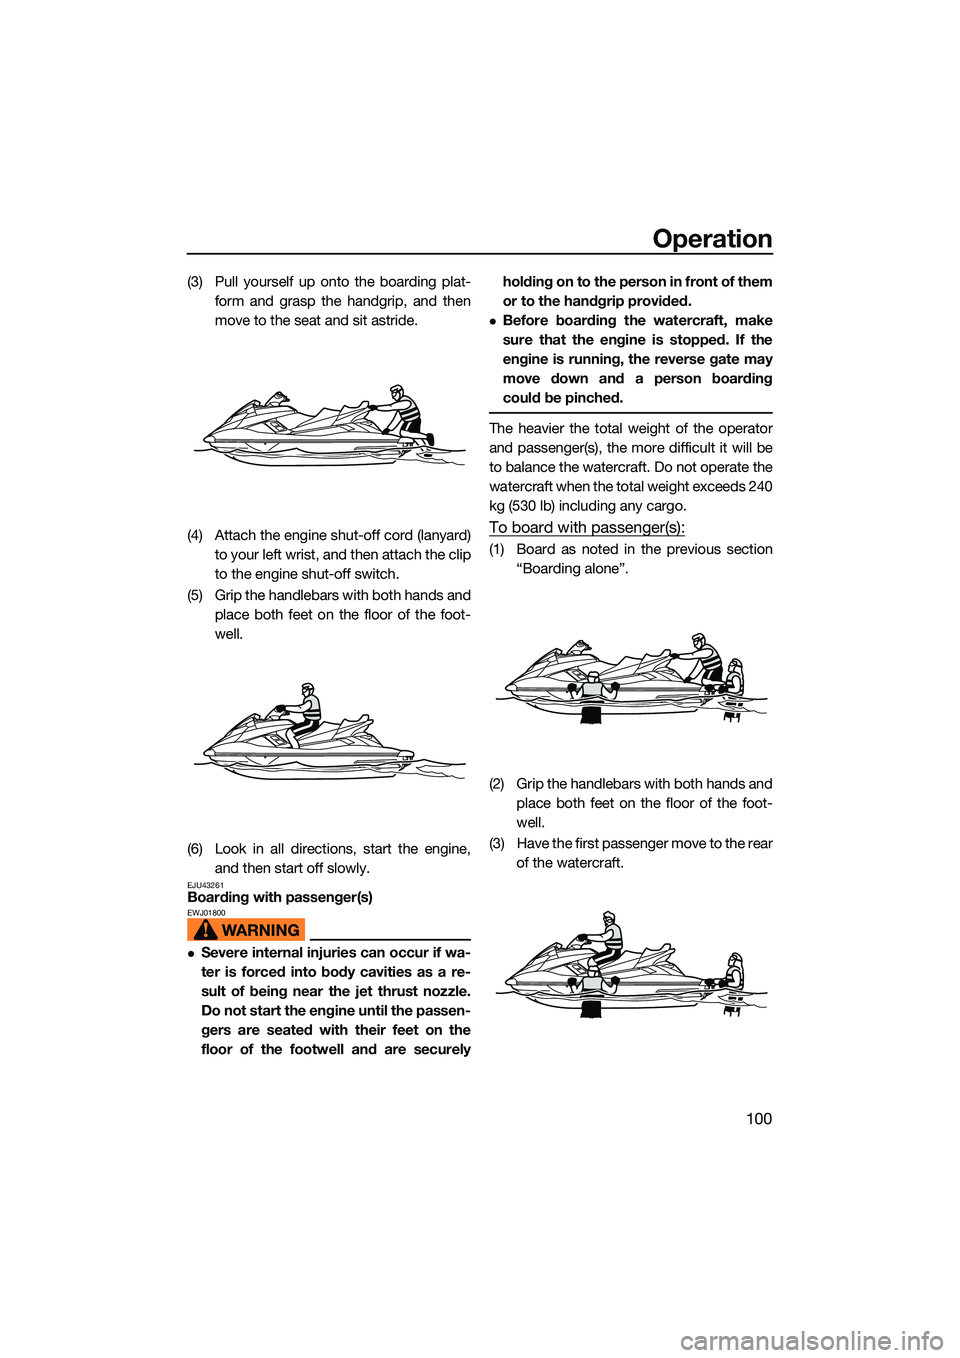 YAMAHA FX HO CRUISER 2022  Owners Manual Operation
100
(3) Pull yourself up onto the boarding plat-form and grasp the handgrip, and then
move to the seat and sit astride.
(4) Attach the engine shut-off cord (lanyard) to your left wrist, and 